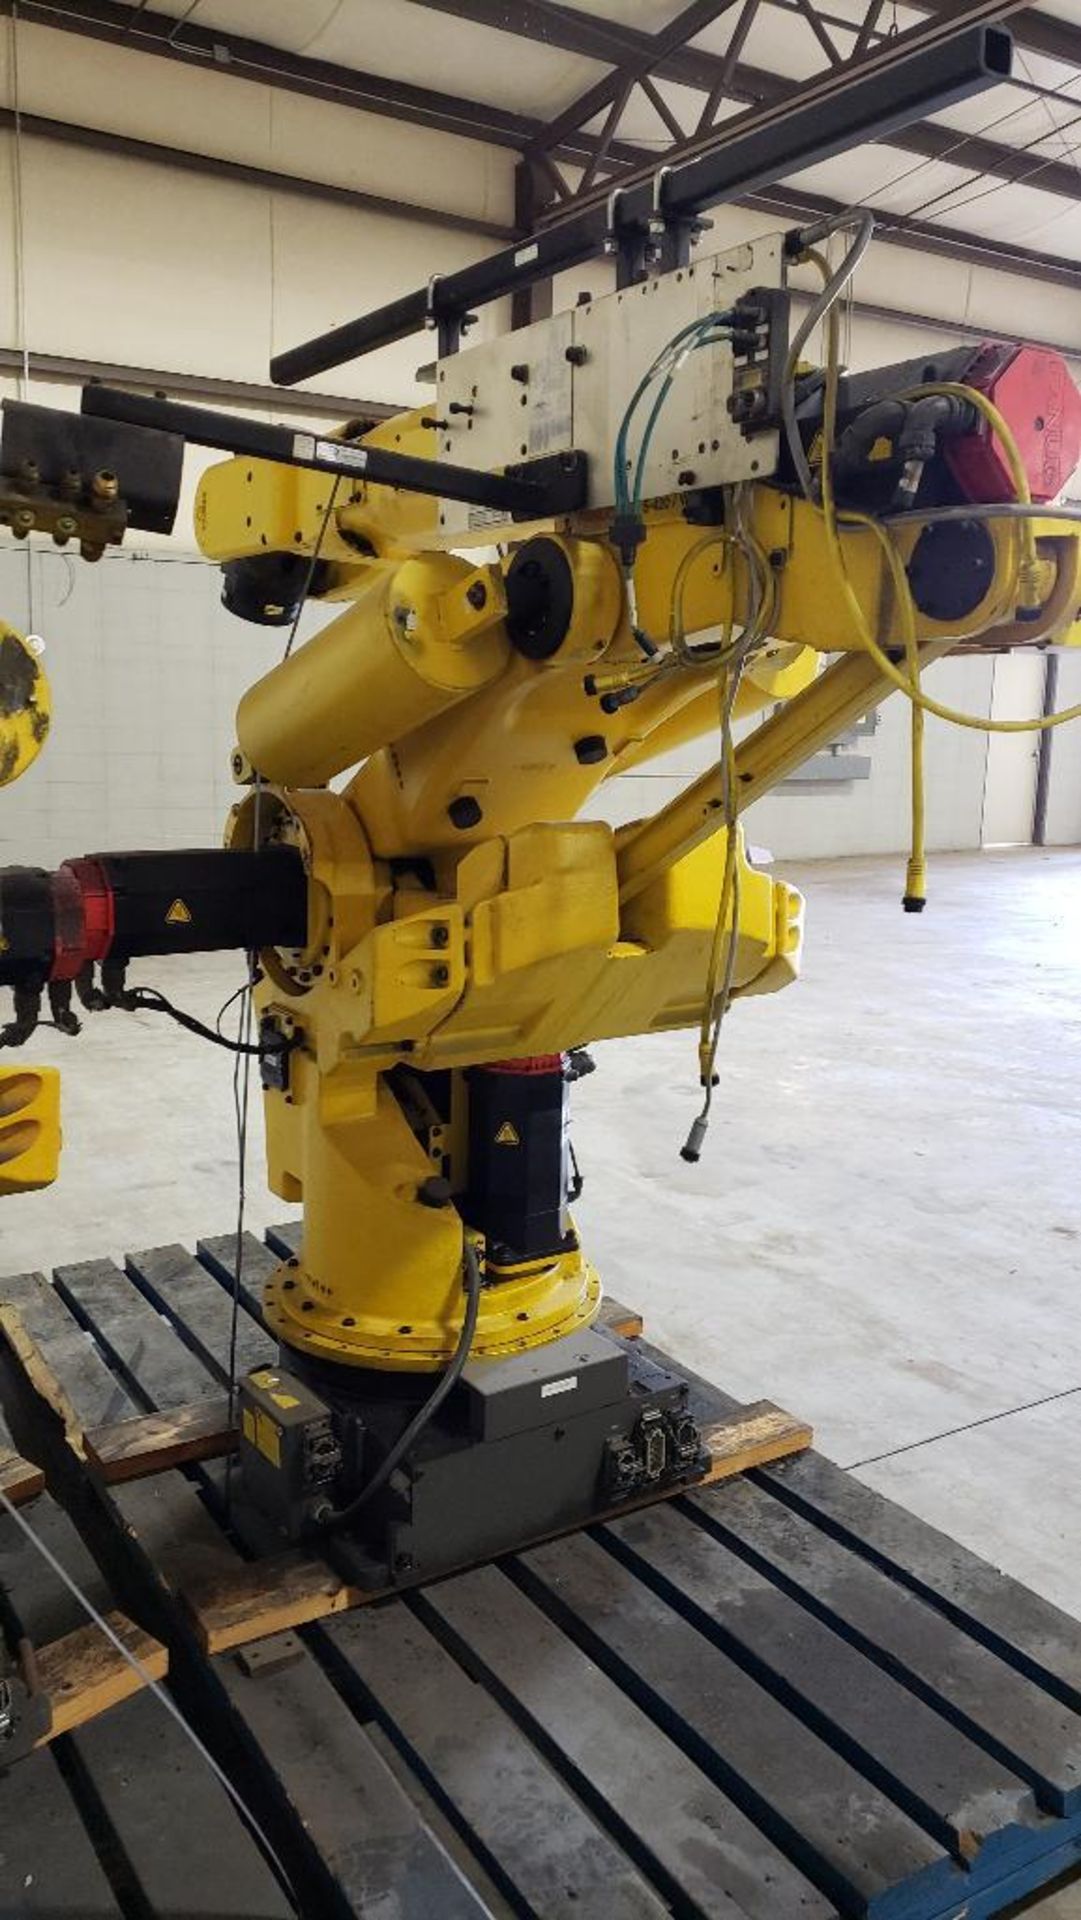 Fanuc S-420iW robot 6-axis arm. - Image 7 of 7